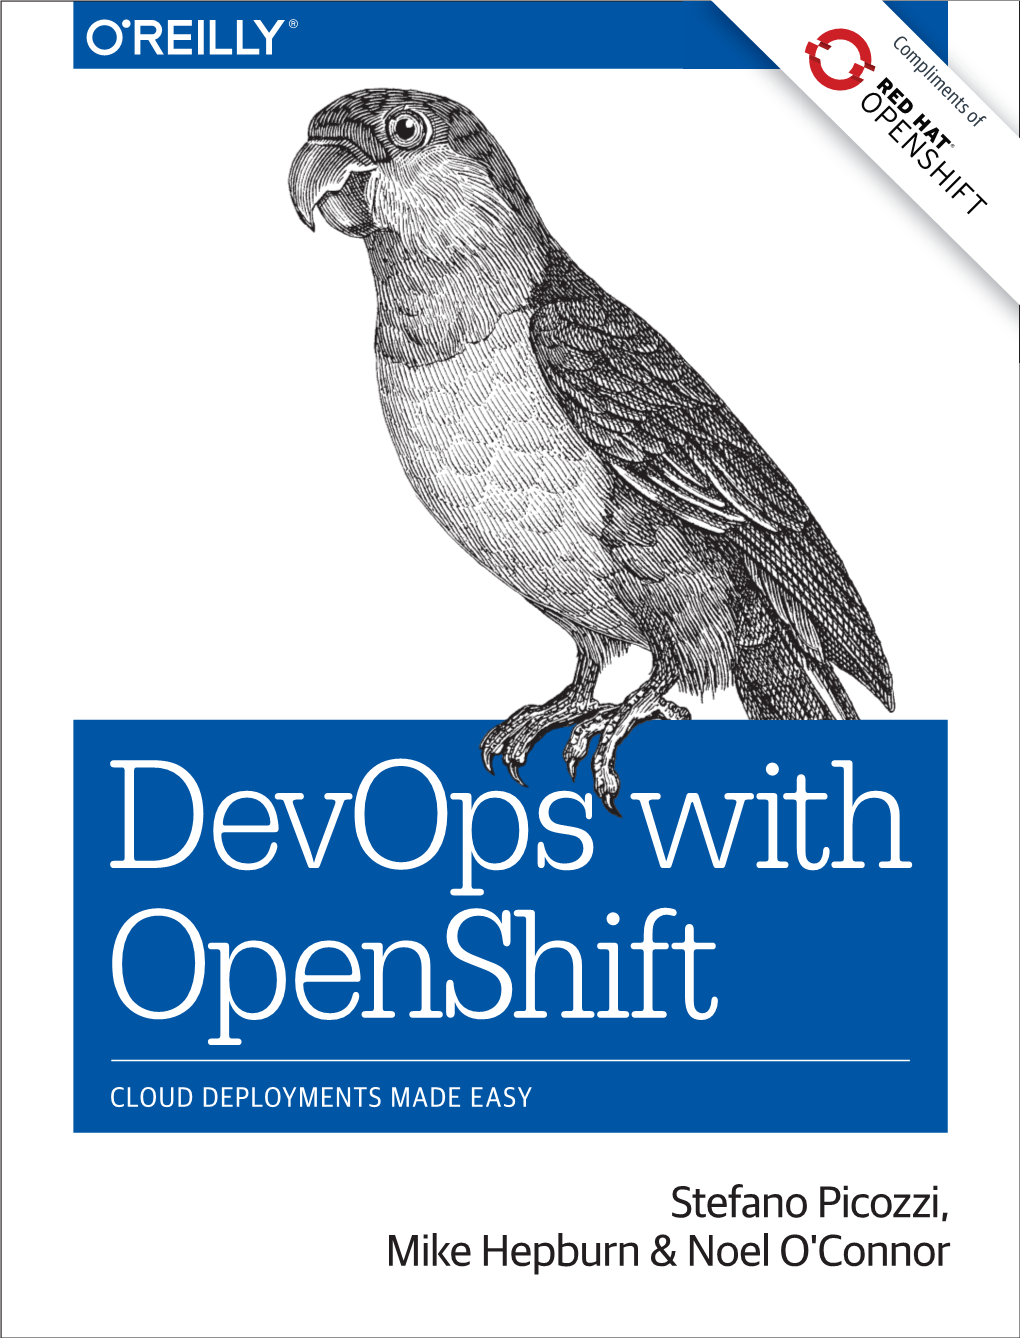 Devops with Openshift CLOUD DEPLOYMENTS MADE EASY